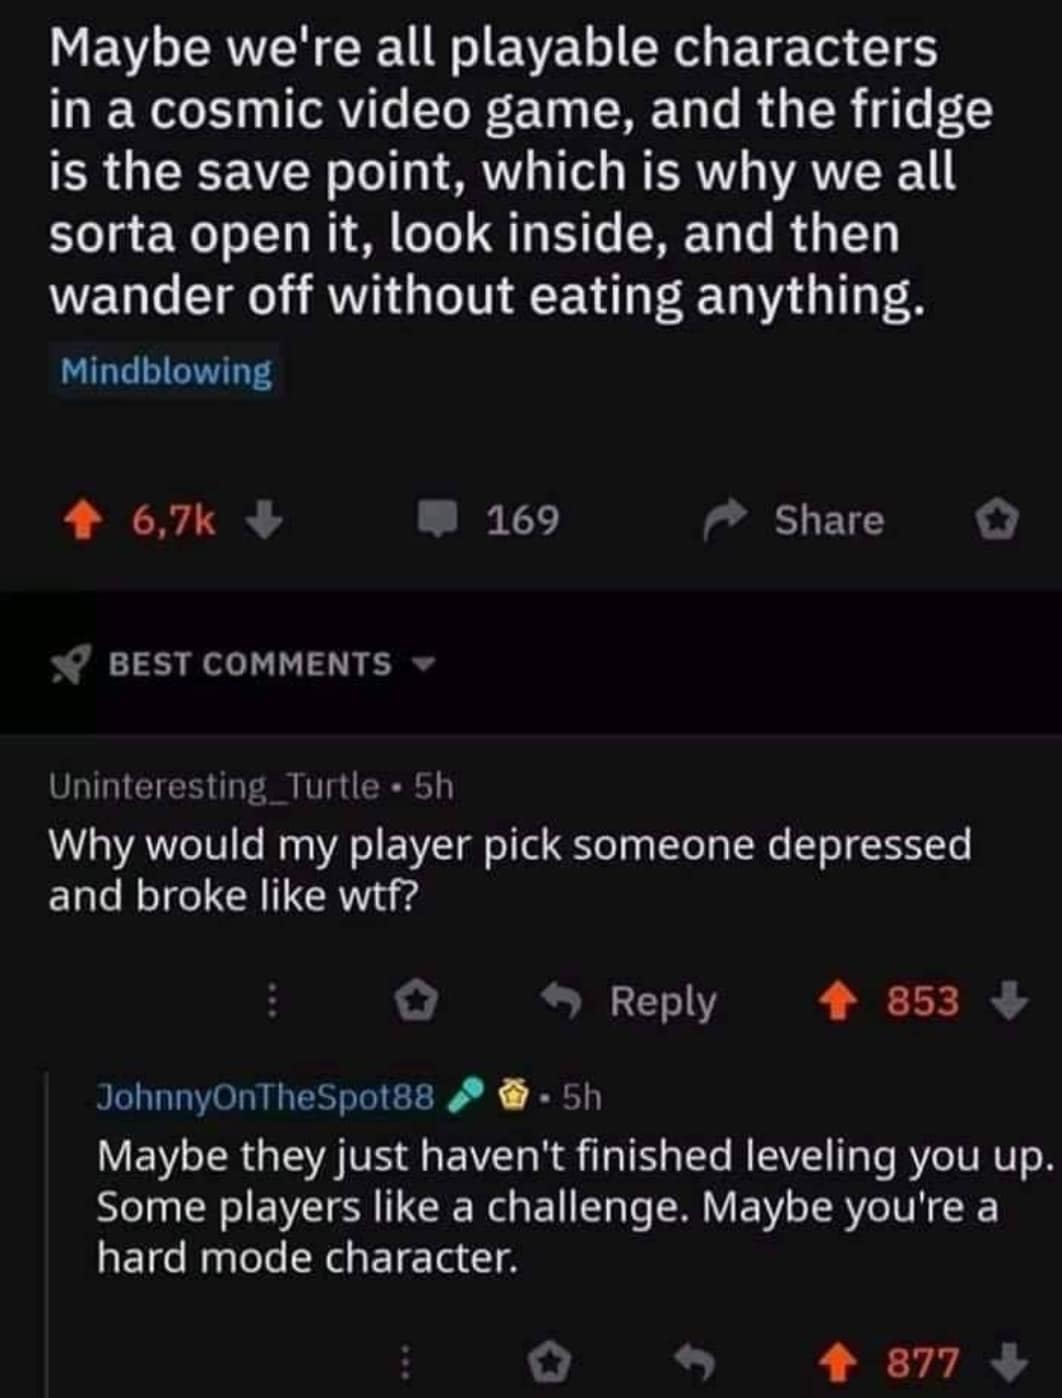 cute wholesome-memes cute text: Maybe we're all playable characters in a cosmic video game, and the fridge is the save point, which is why we all sorta open it, look inside, and then wander off without eating anything. Mindblowing 6.7k BEST COMMENTS Uninteresting _ Turtle • 5h 169 Share Why would my player pick someone depressed and broke like wtf? 0 9 Reply + 853 + JohnnyOnTheSpot88 Maybe they just haven't finished leveling you up. Some players like a challenge. Maybe you're a hard mode character. 